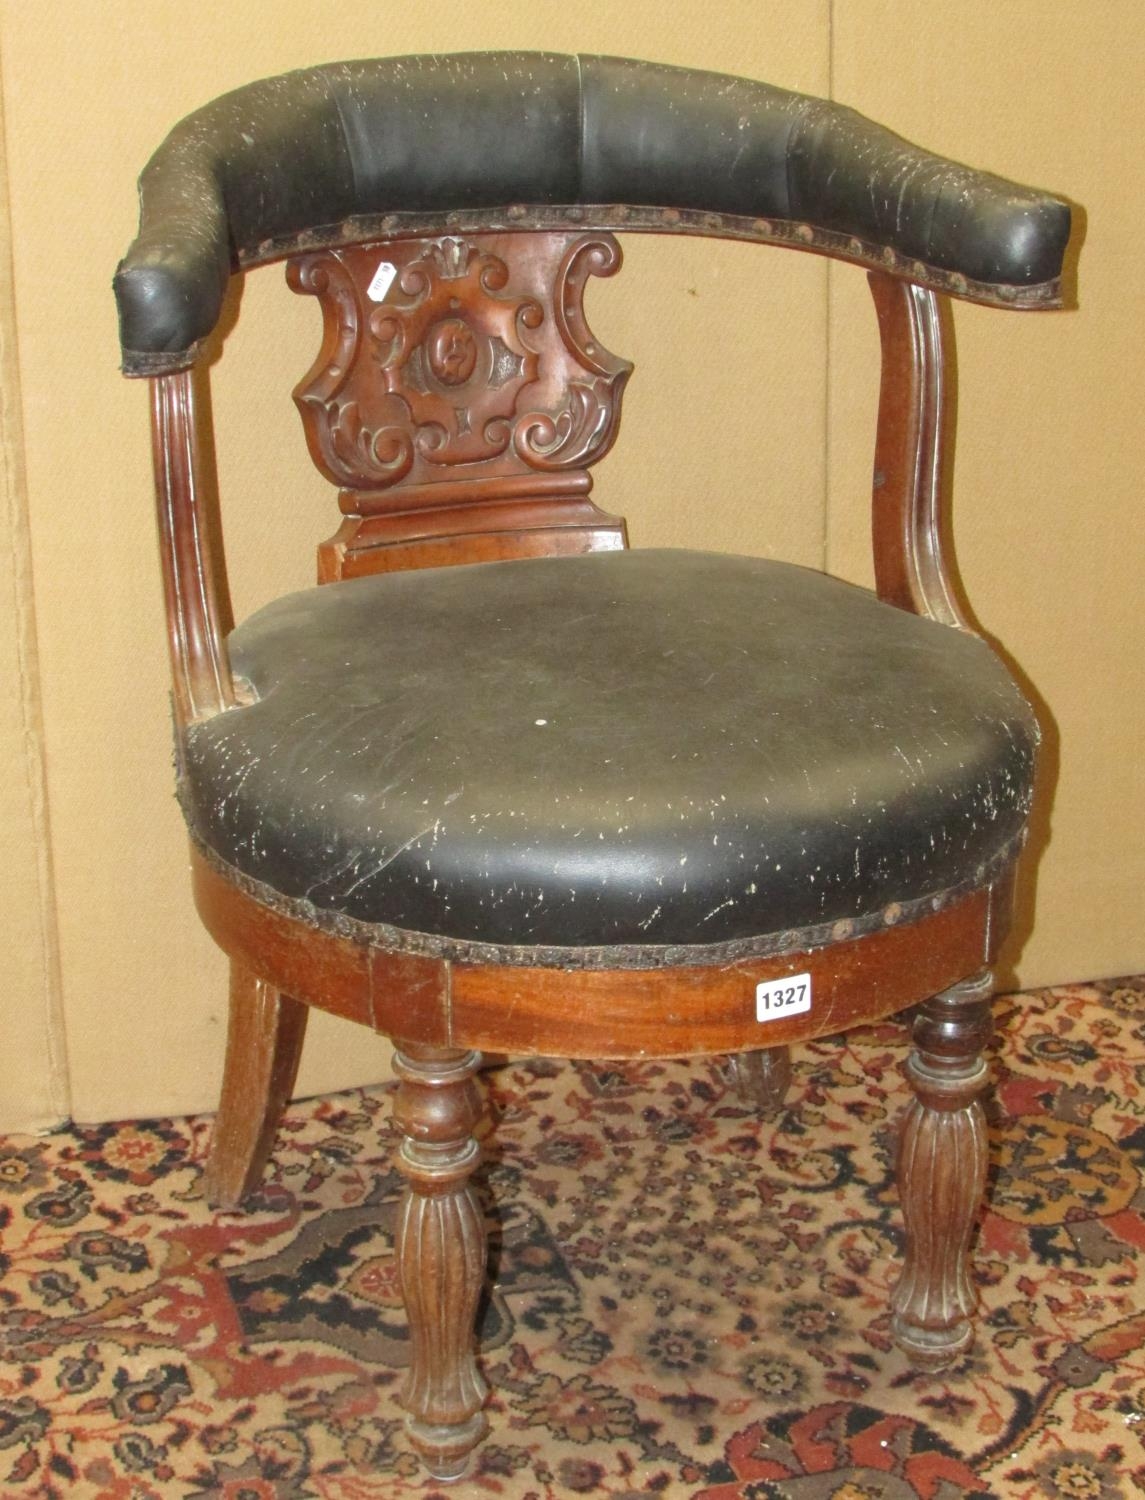 A 19th century mahogany library chair with carved splat, horseshoe shaped back and circular seat - Image 2 of 4